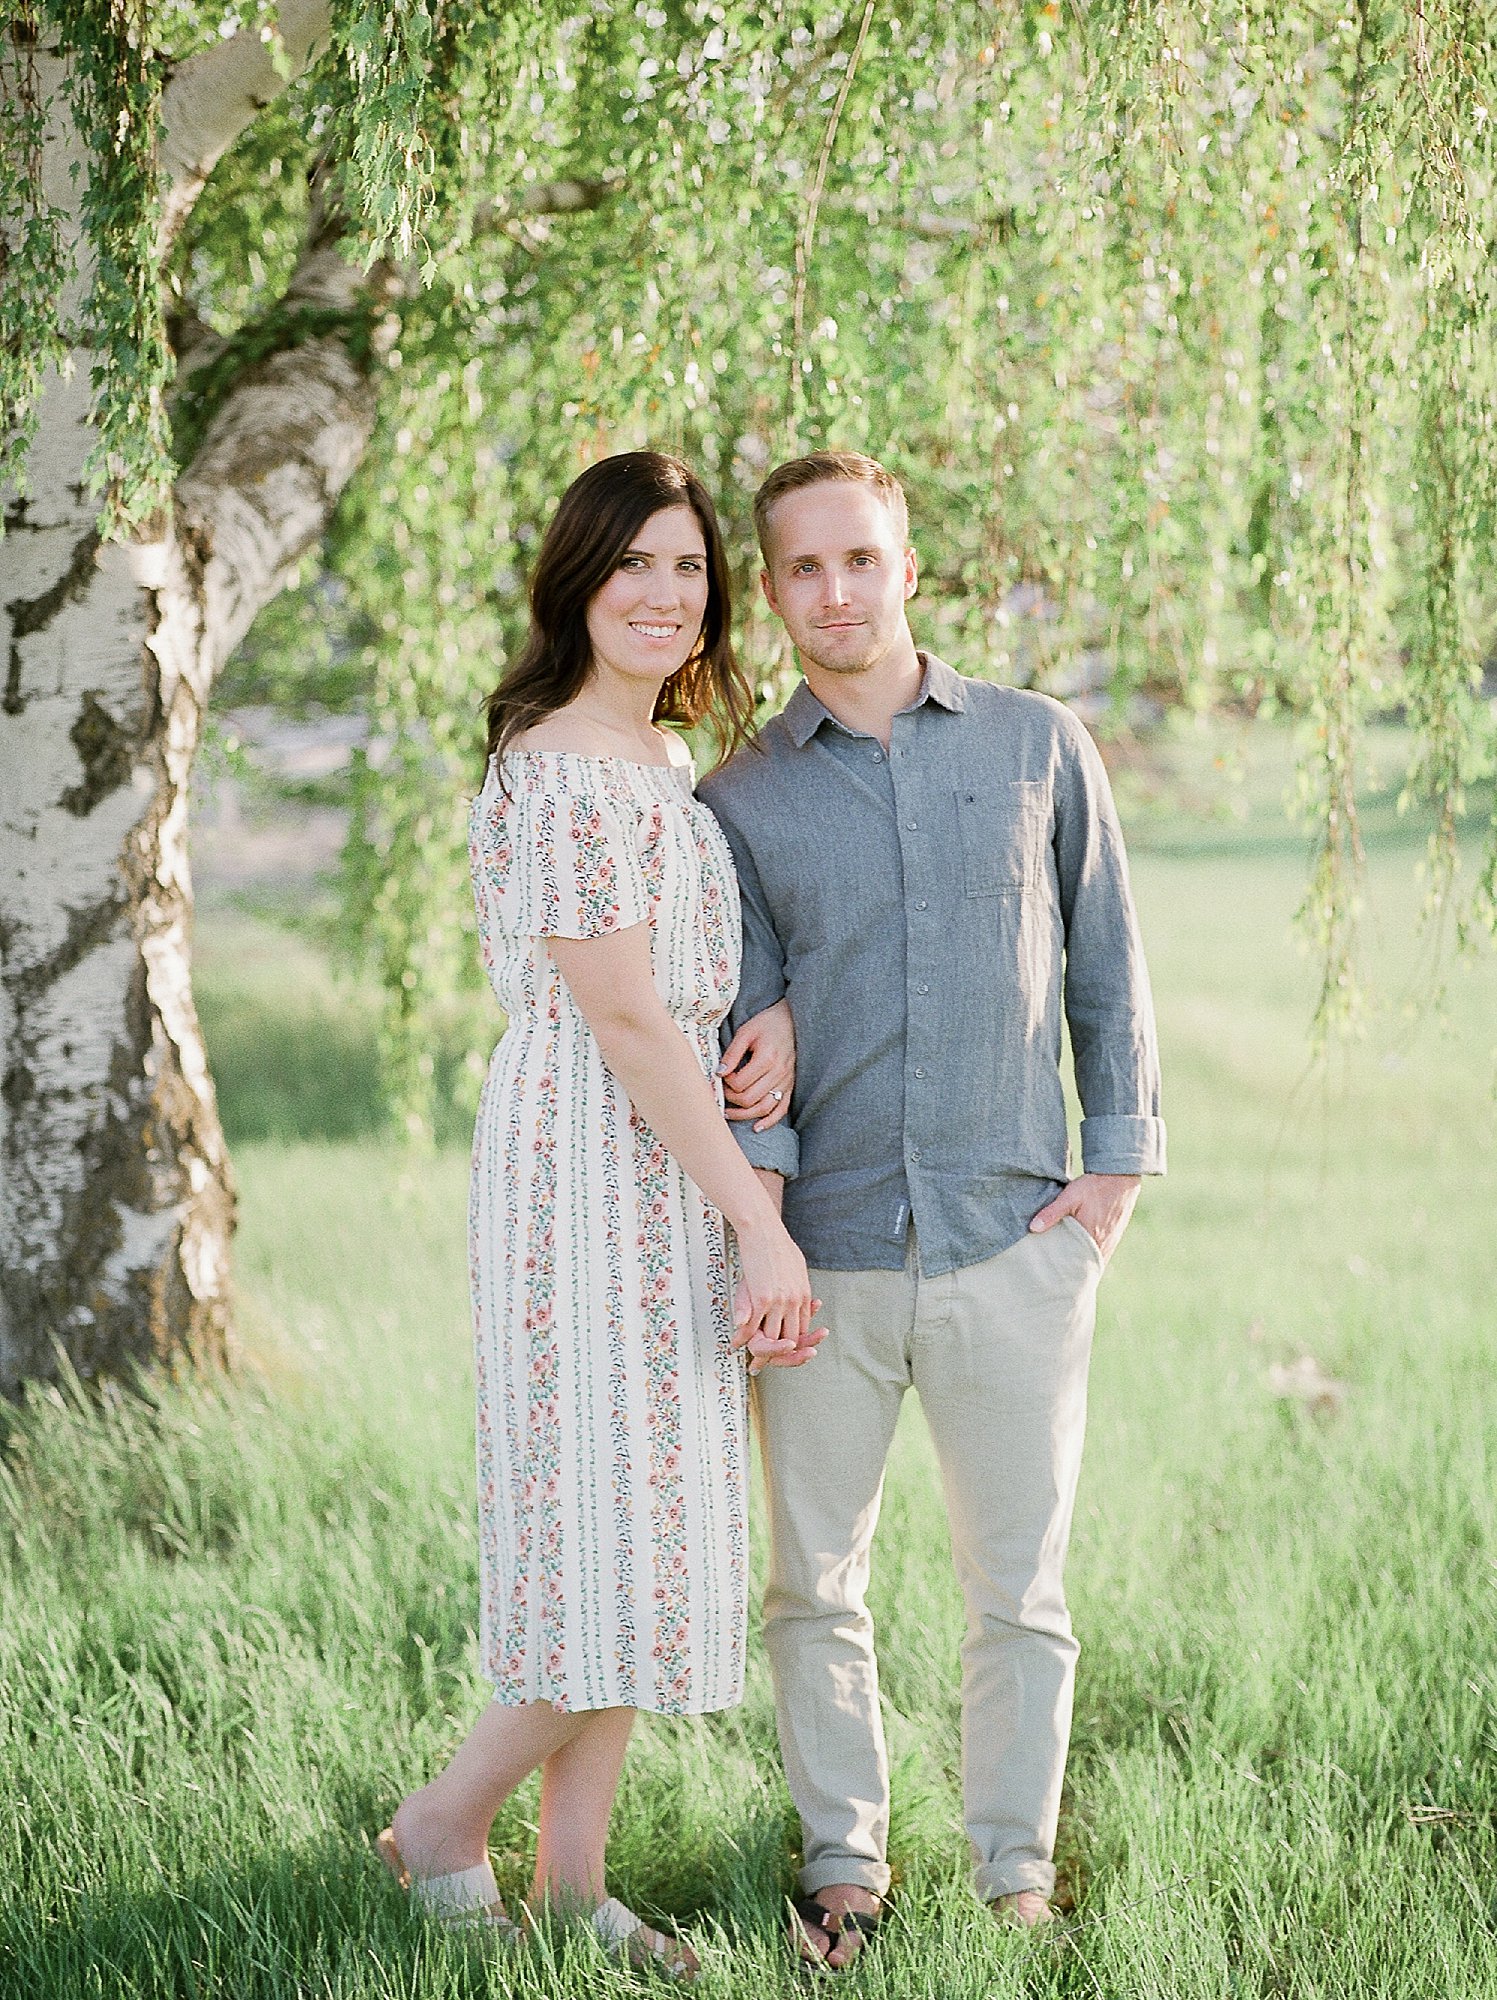 Winnipeg Wedding Photographer, Neutral Couples Outfits for Summer, Summer Outfit Ideas for Engagement Session, Manitoba Wedding Photographer